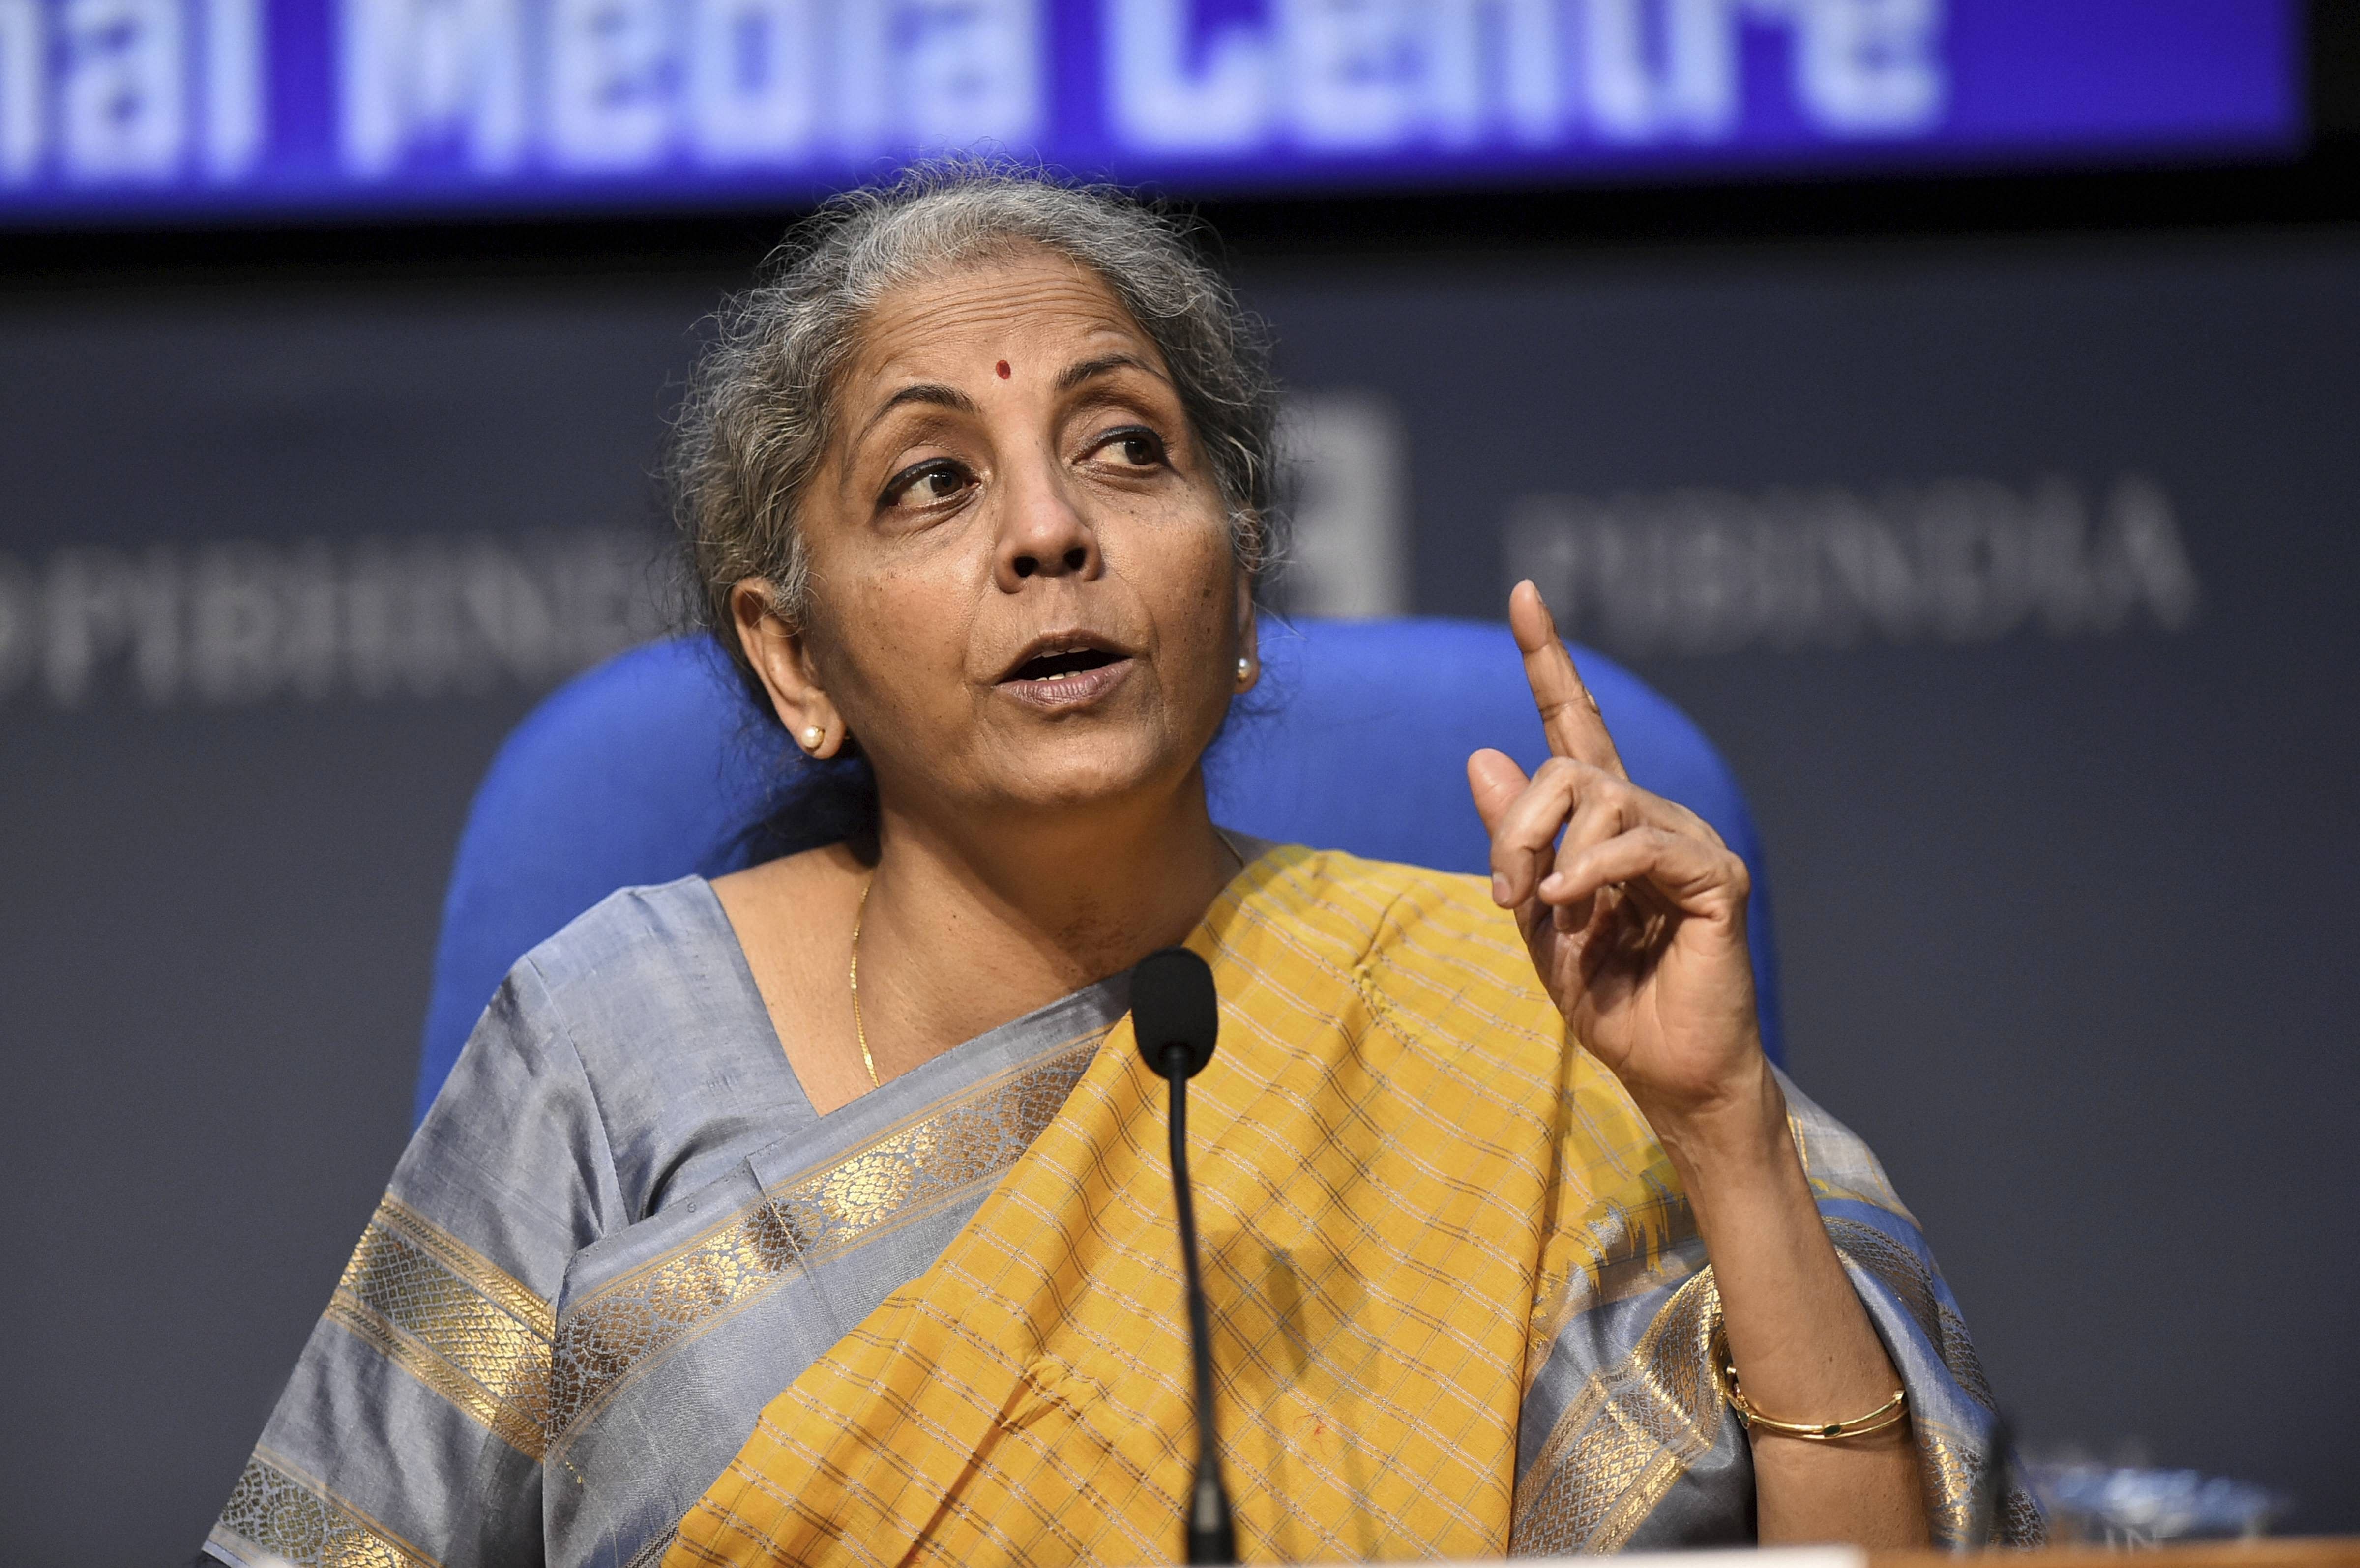 Union Finance Minister Nirmala Sitharaman speaks during the post-budget press conference, at National Media Centre in New Delhi, Monday, Feb. 1, 2021. Credit: PTI Photo